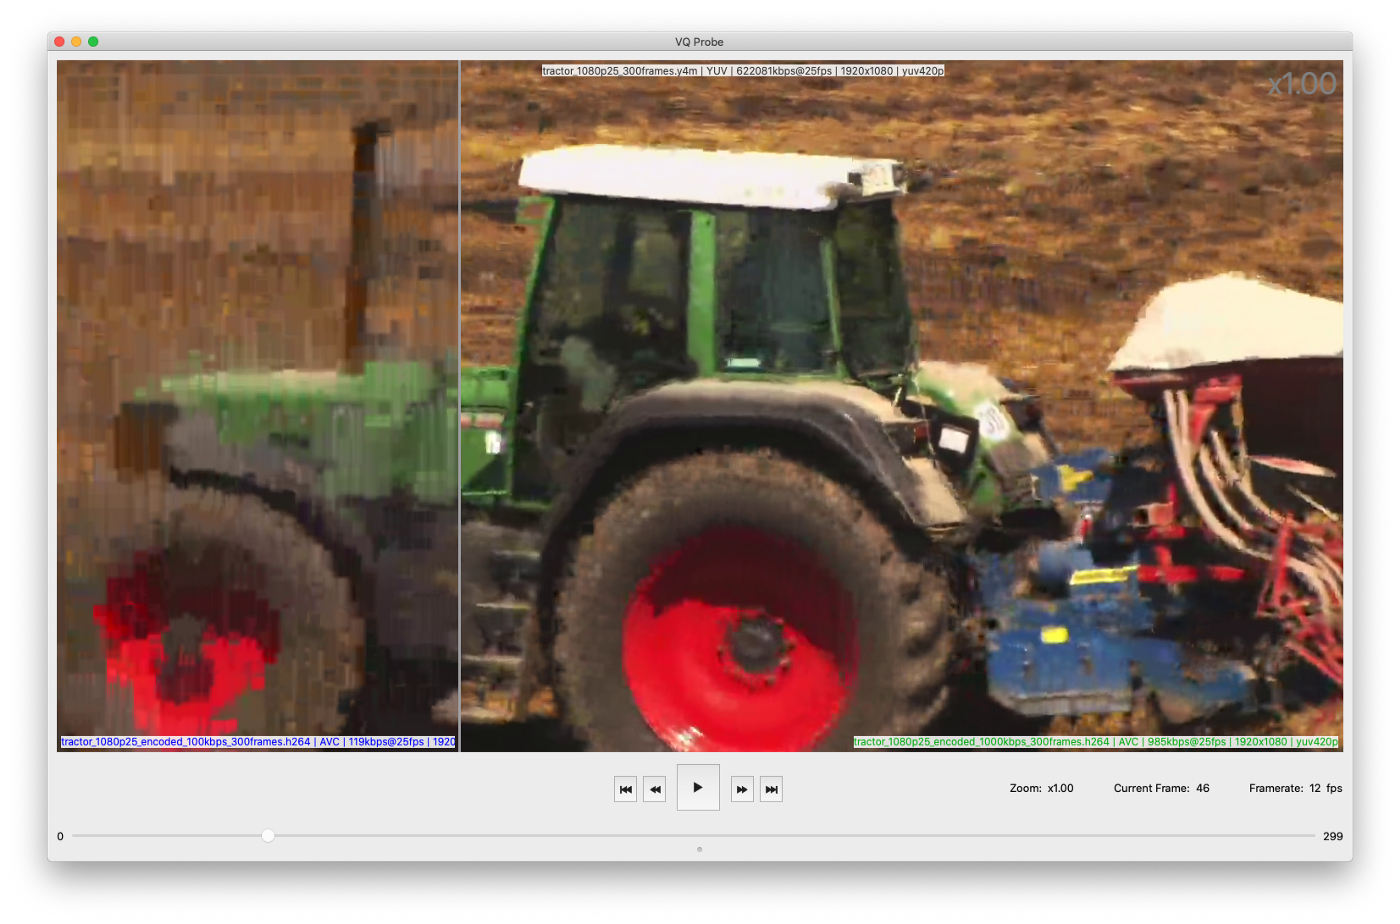 tractor_1080p25_encoded_100kbps_300frames.h264 vs. tractor_1080p25_encoded_1000kbps_300frames.h264, frame #46